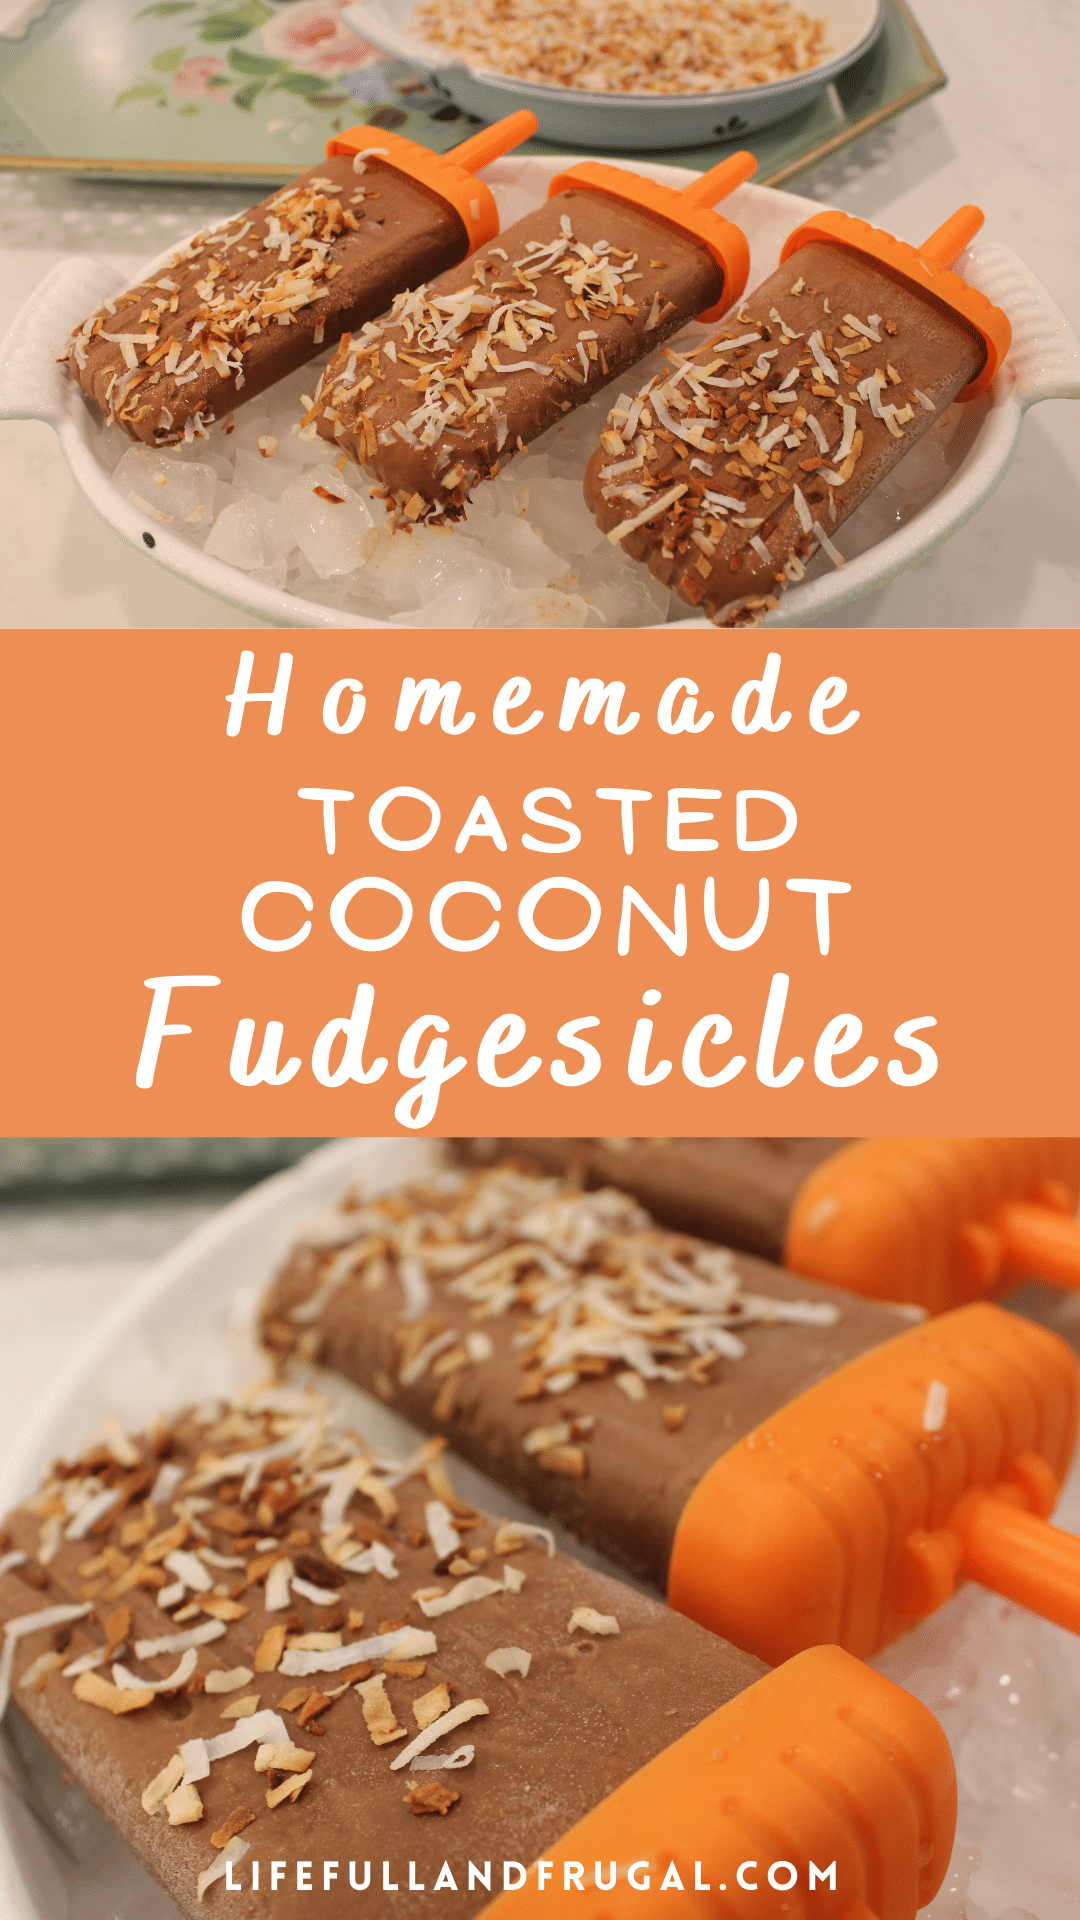 homemade toasted coconut fudgesicle recipe life full and frugal Pinterest